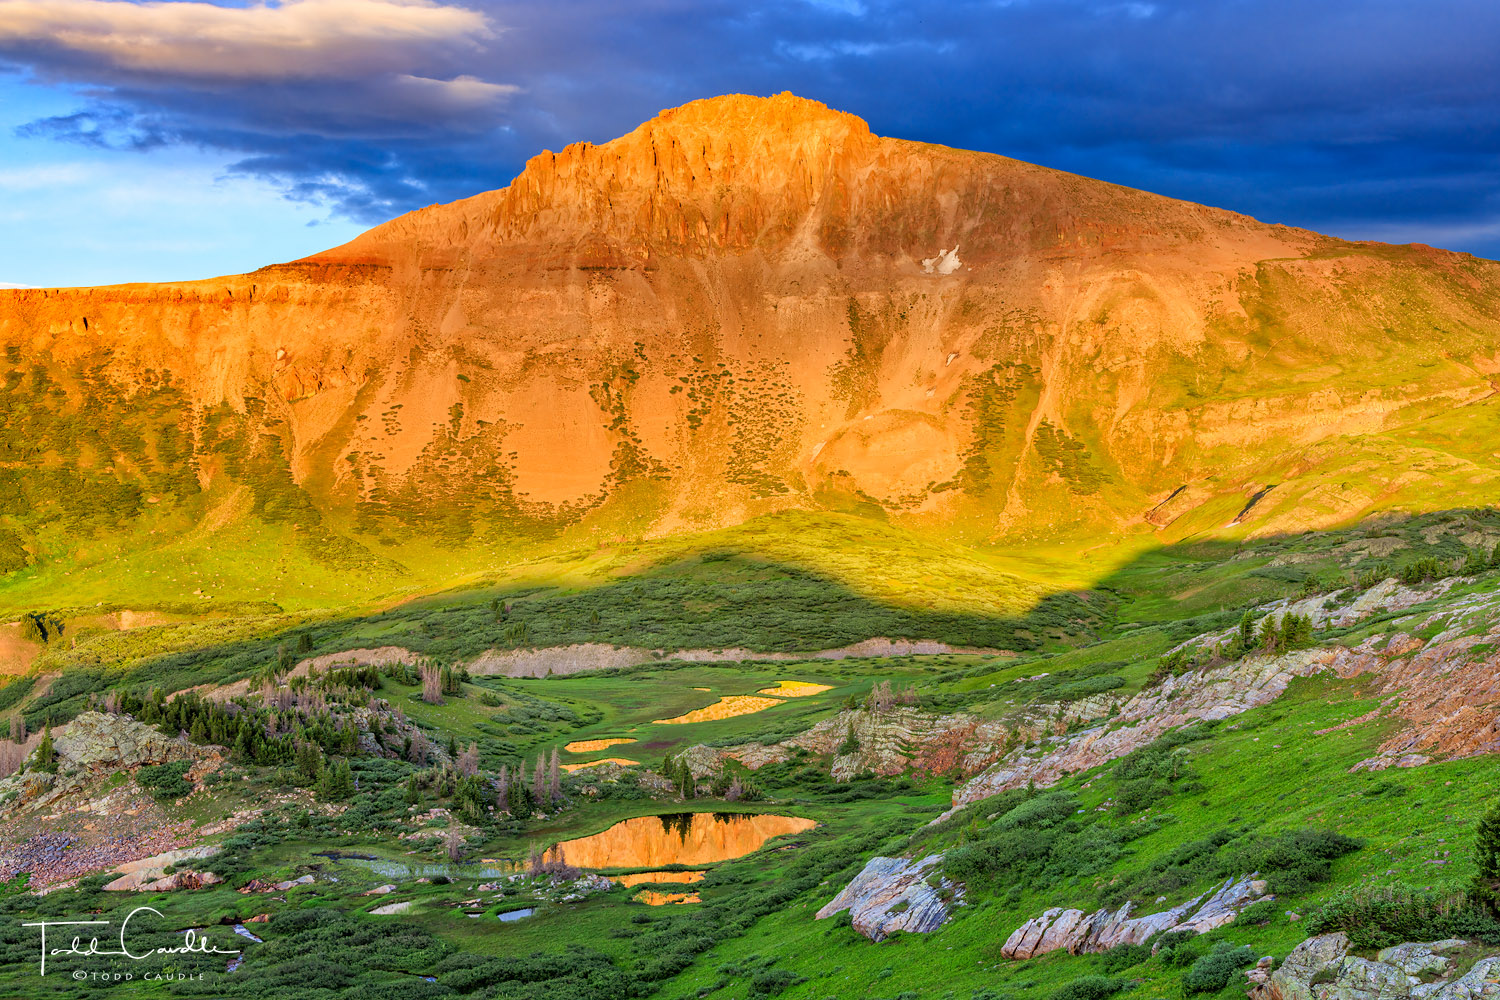 Small tarns in a remote valley reflect sunset light on Ute Ridge in the Grenadier Range.